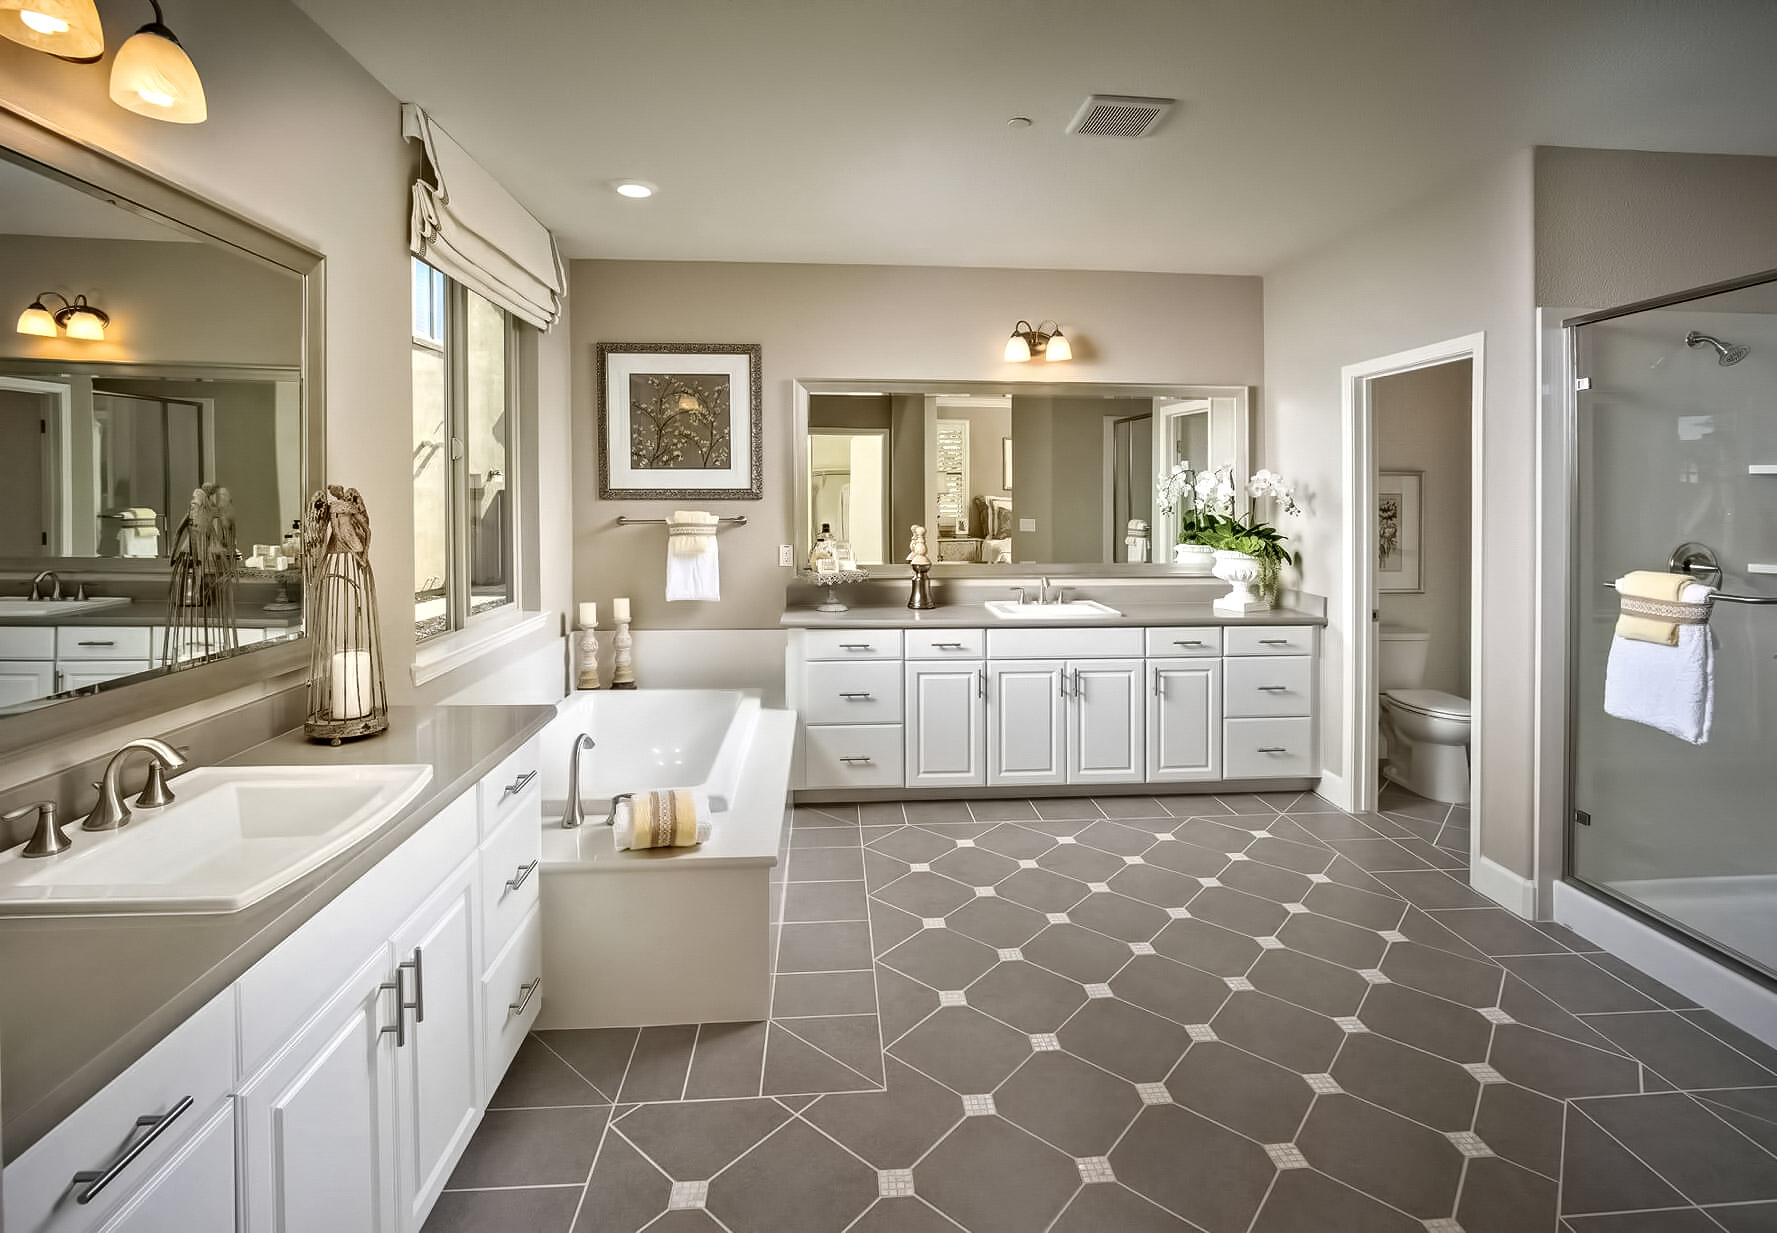 Top 4 Rules to Consider for a Luxury Bathroom Renovation – The Pinnacle List